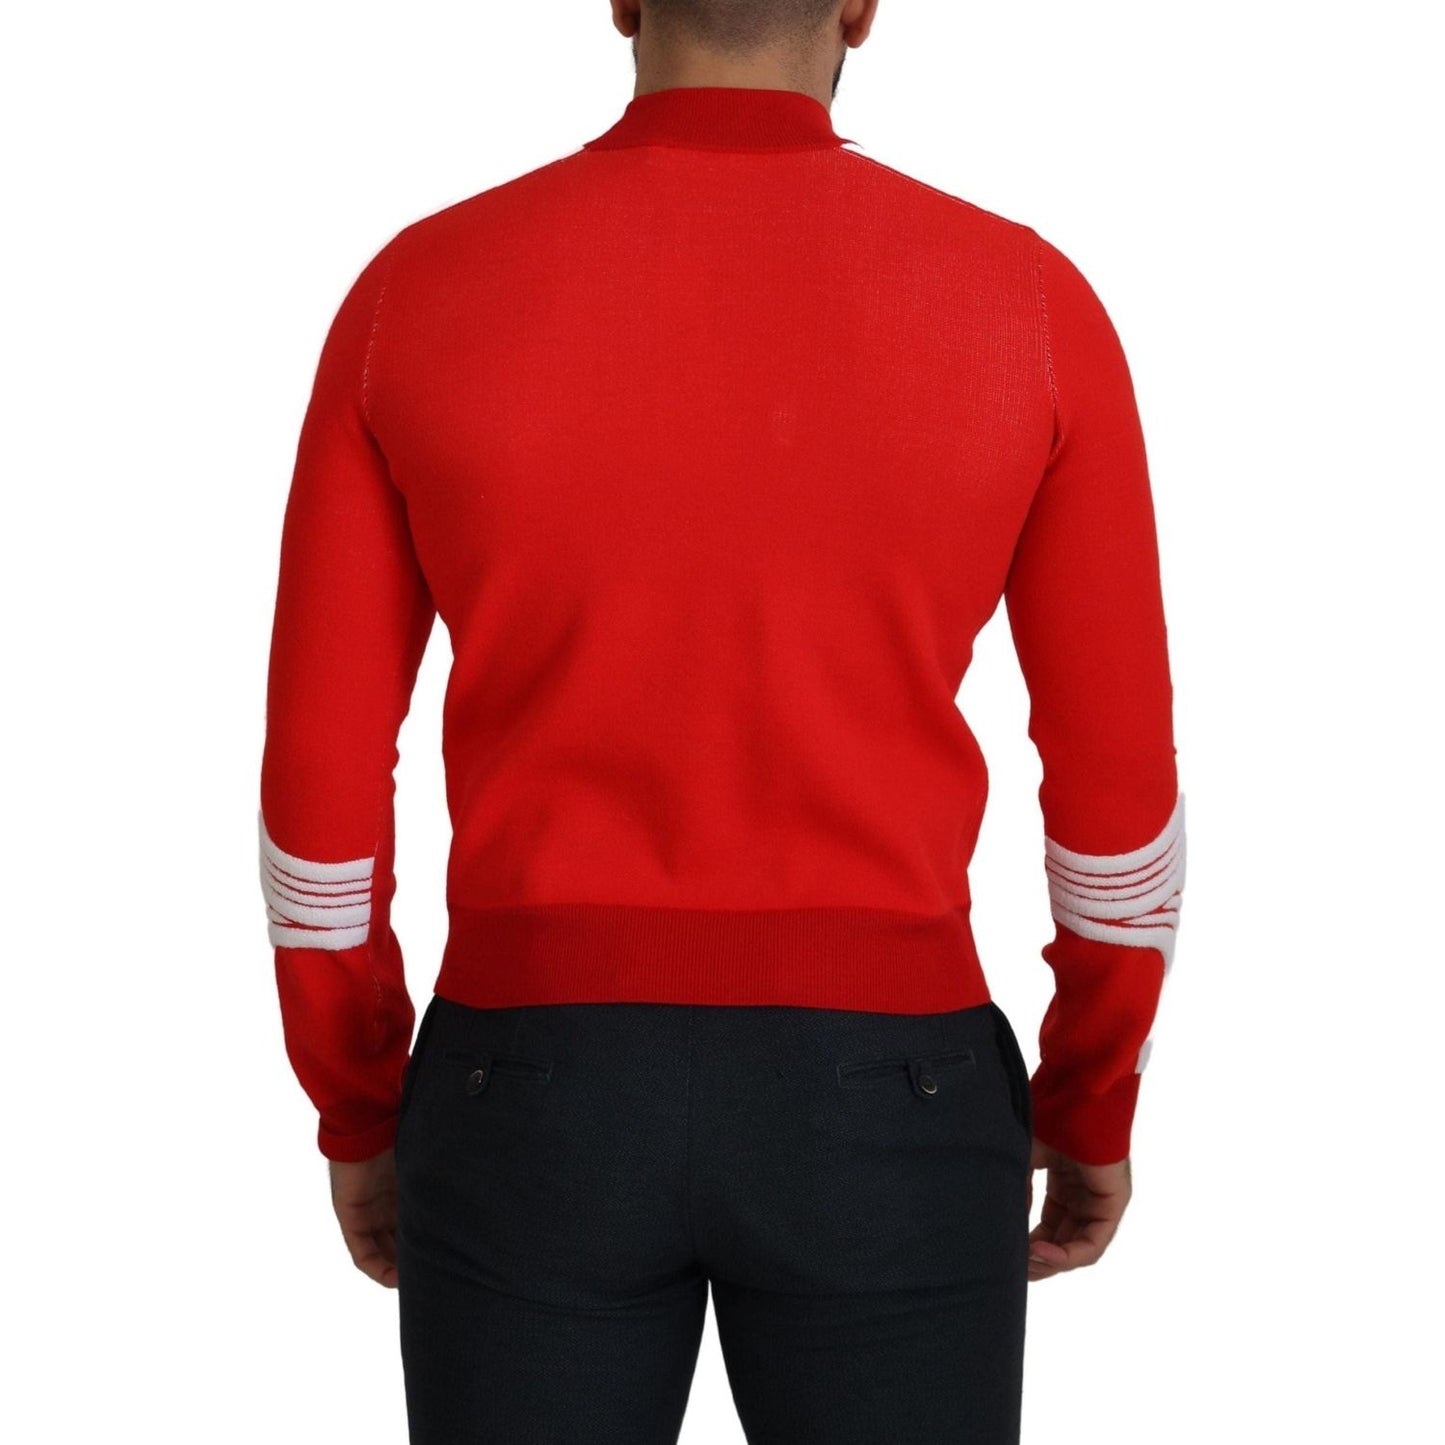 GCDS Elegant Red Pullover Sweater for Men red-wool-logo-printed-crew-neck-men-pullover-sweater IMG_0587-scaled-56f0f64a-39c.jpg